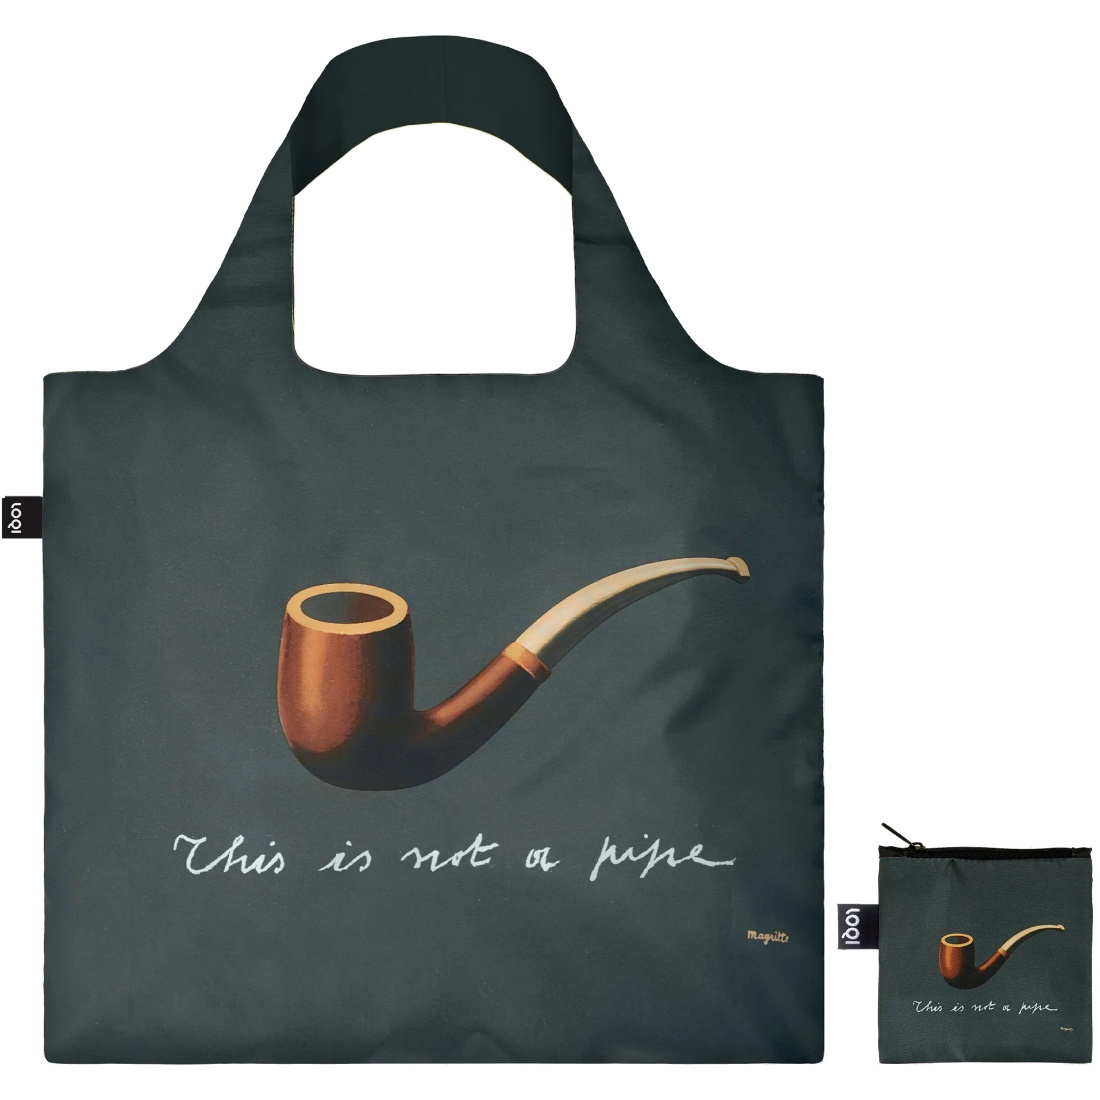 Tote Bag René Magritte  The Treachery of Images Loqi